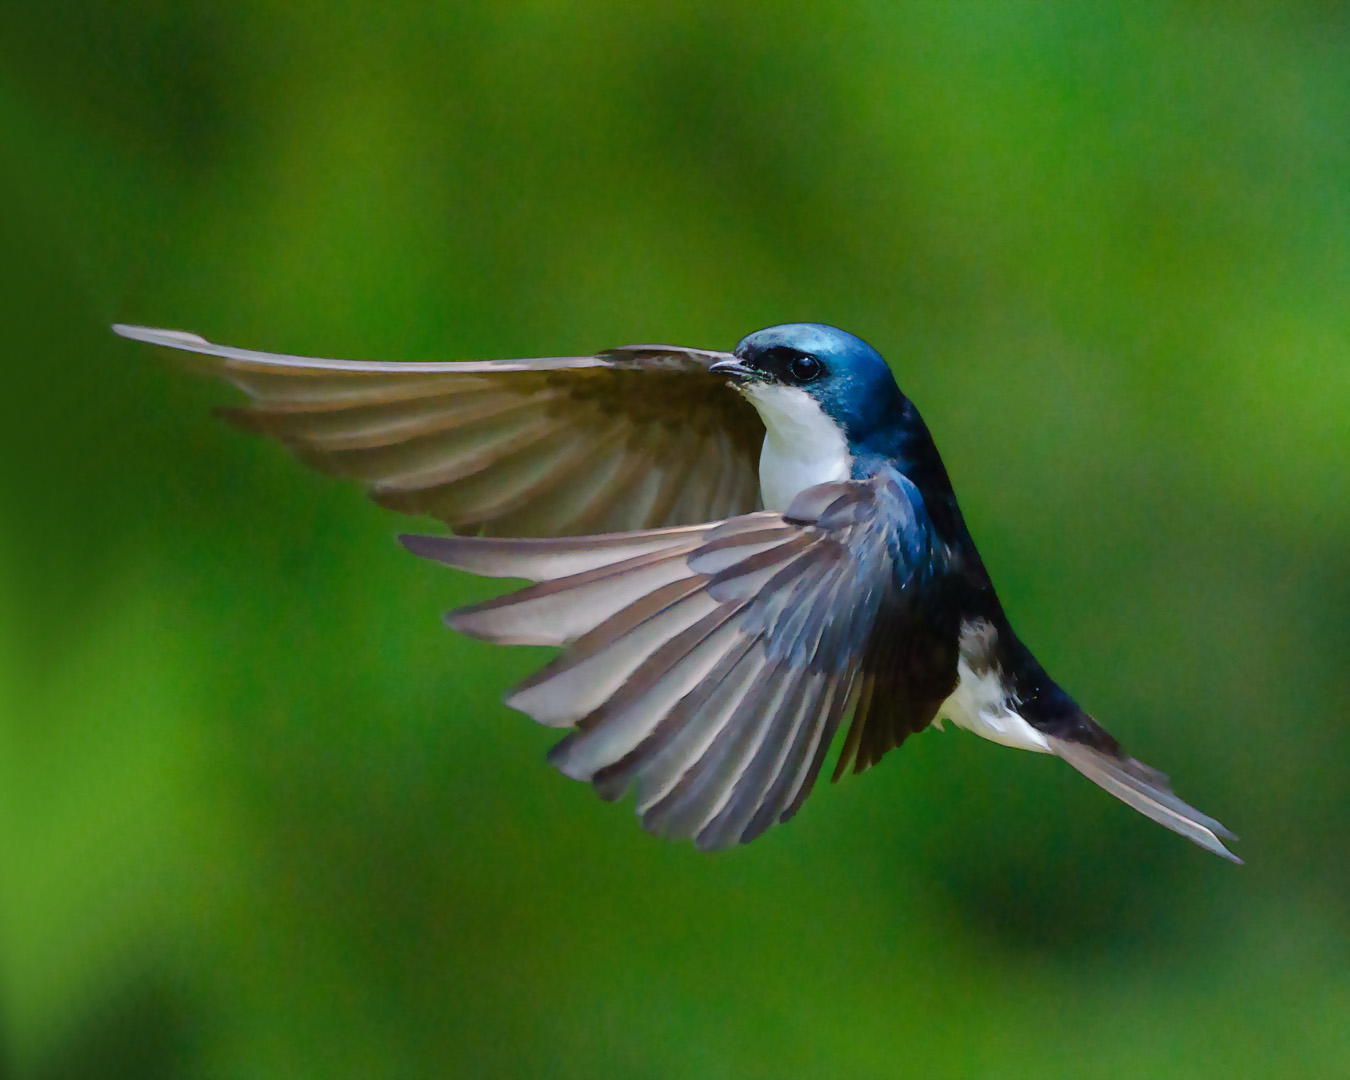 A picture of a tree swallow captured in flight with its wings extended like it is about to hug something